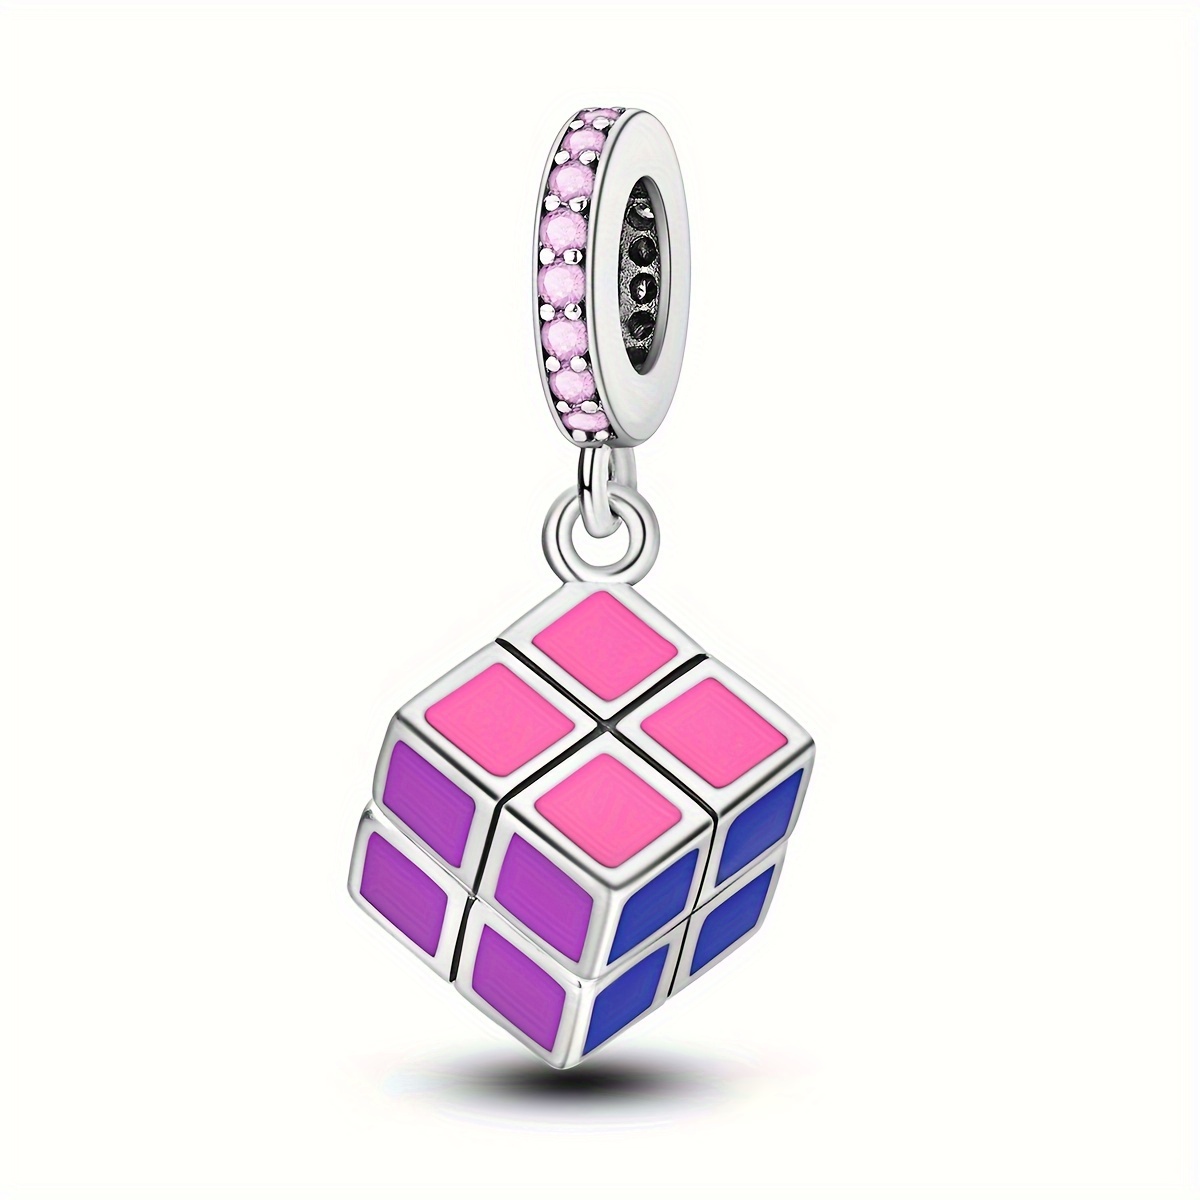 

1pc 925 Silver Plated Colorful Rotating Cube Charm Dice Cute Game Pendant Fits Original Bracelet Diy Jewelry Making Gift For Women